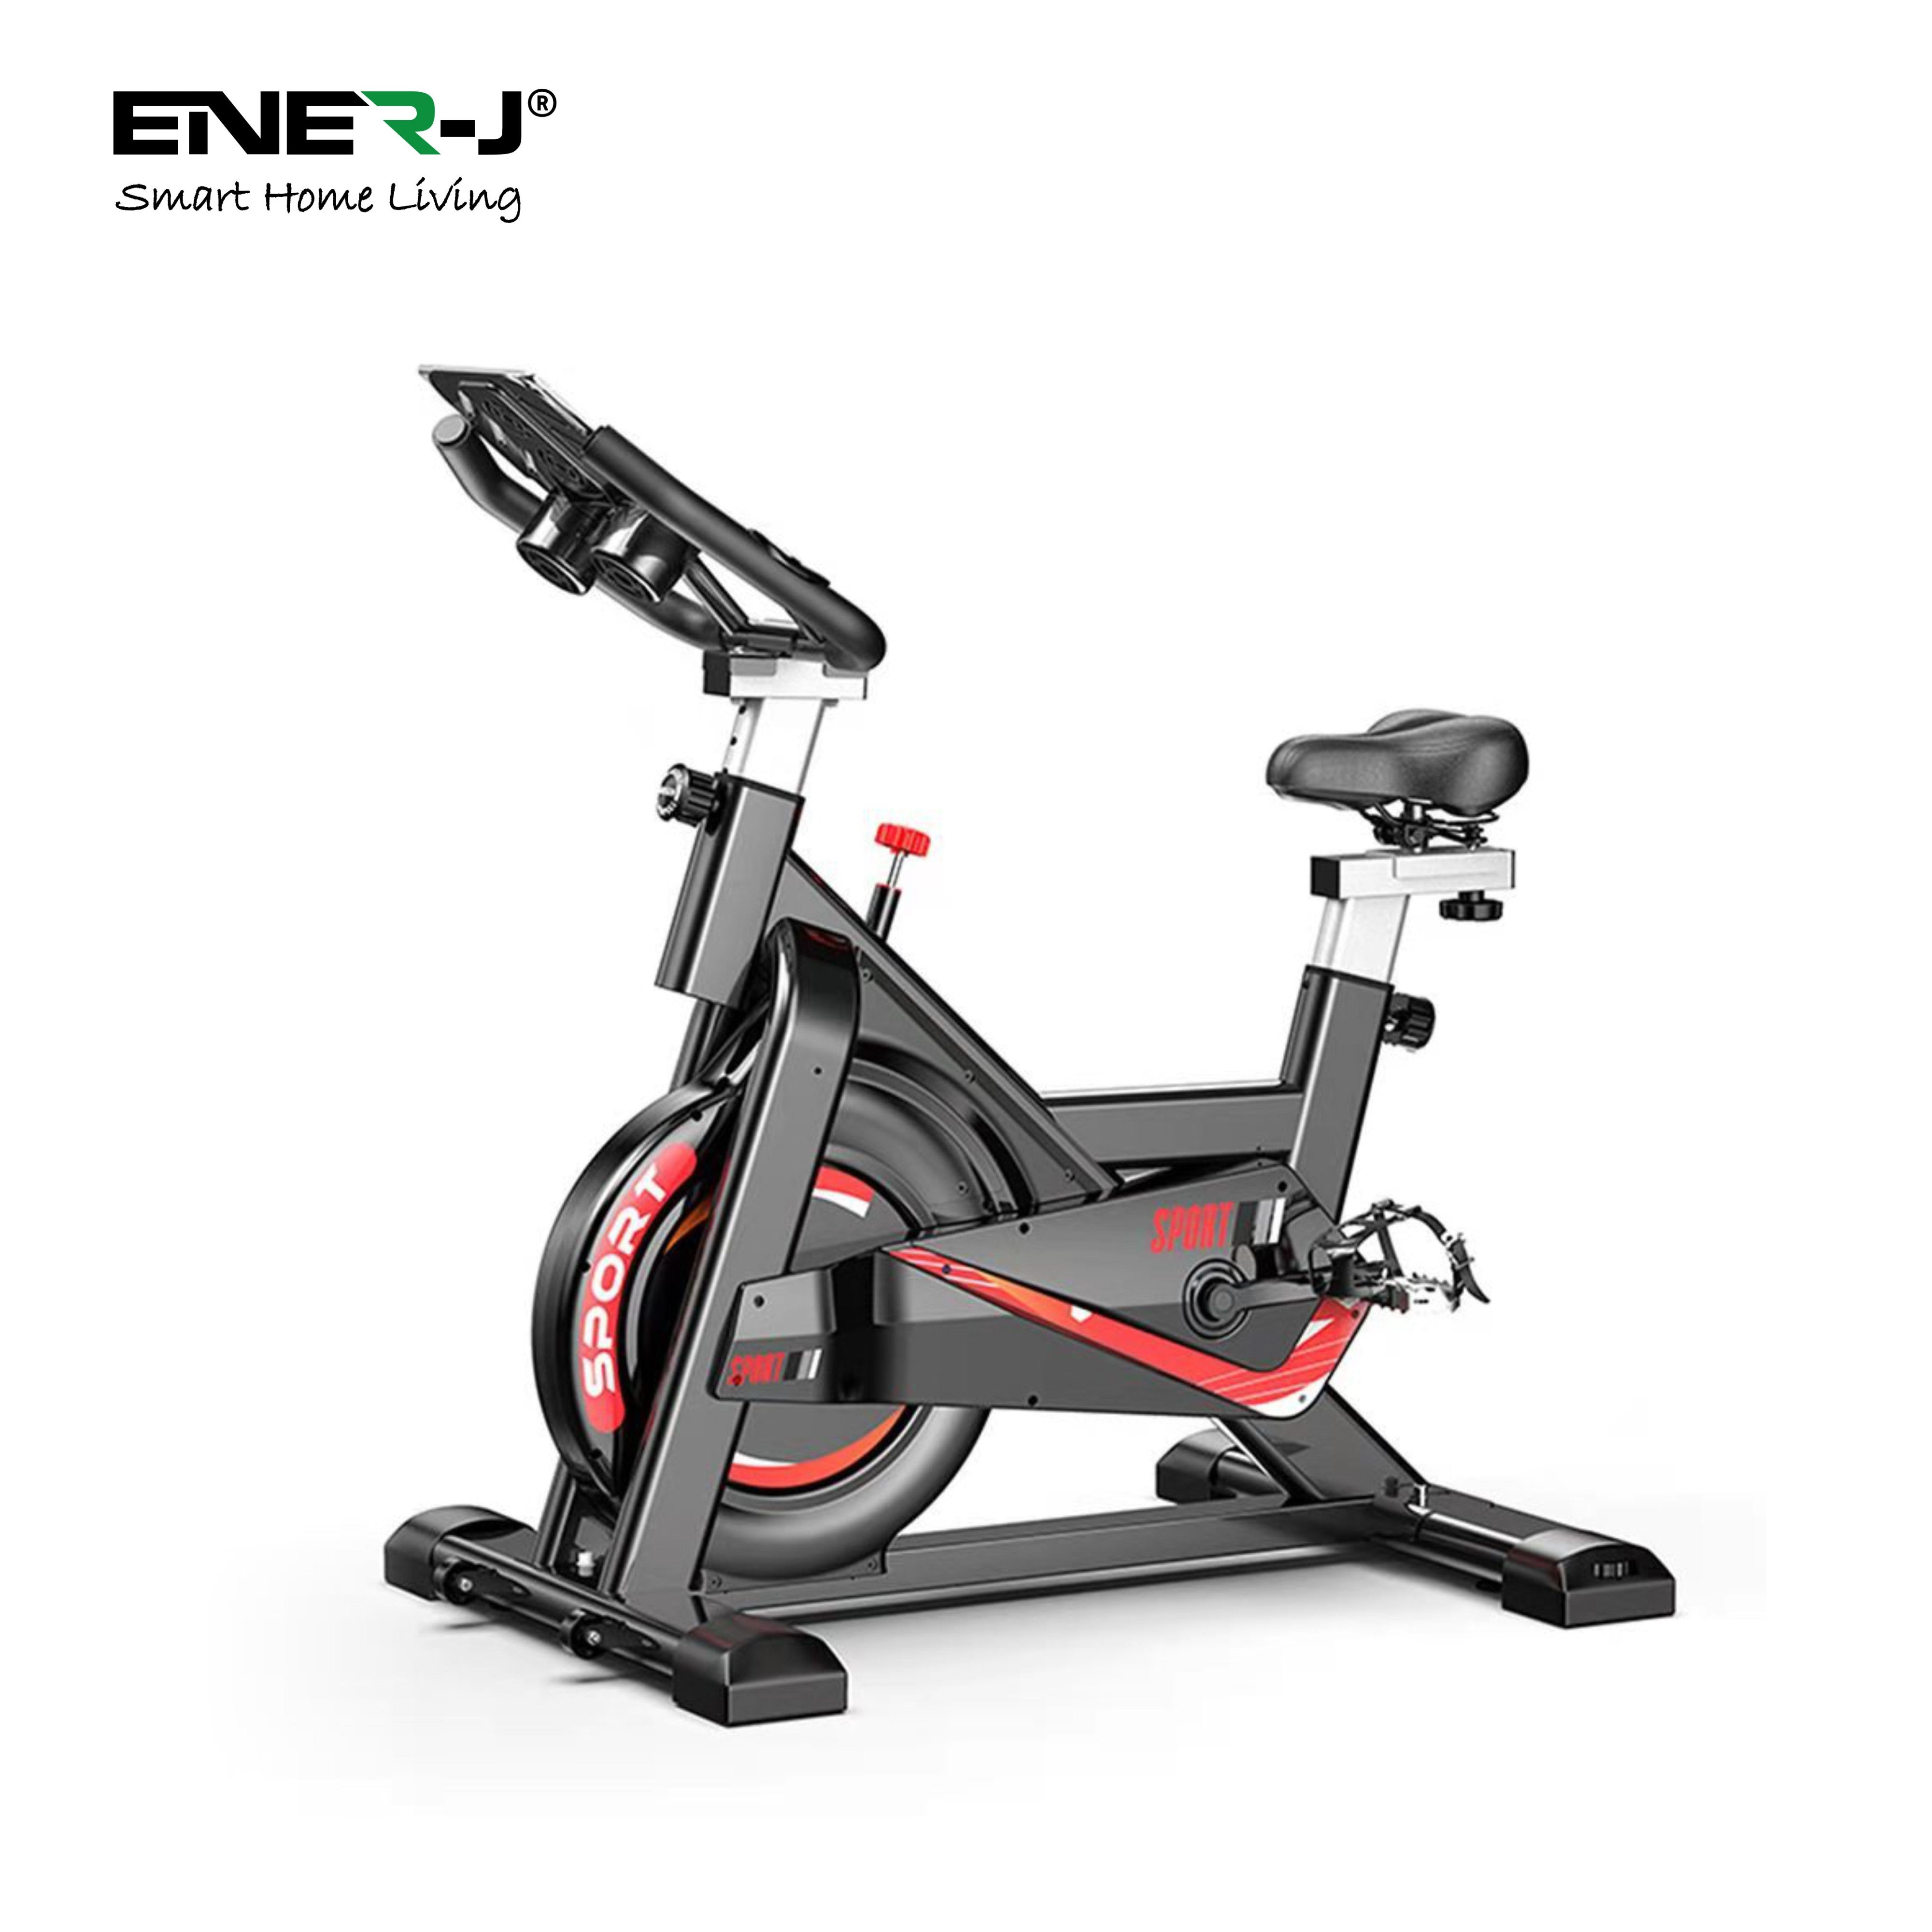 Ultra Quiet Exercise Bike with Multifunctional Smart Display and Adjustable Resistance Flywheel, Stationary Spin bike for Home Training